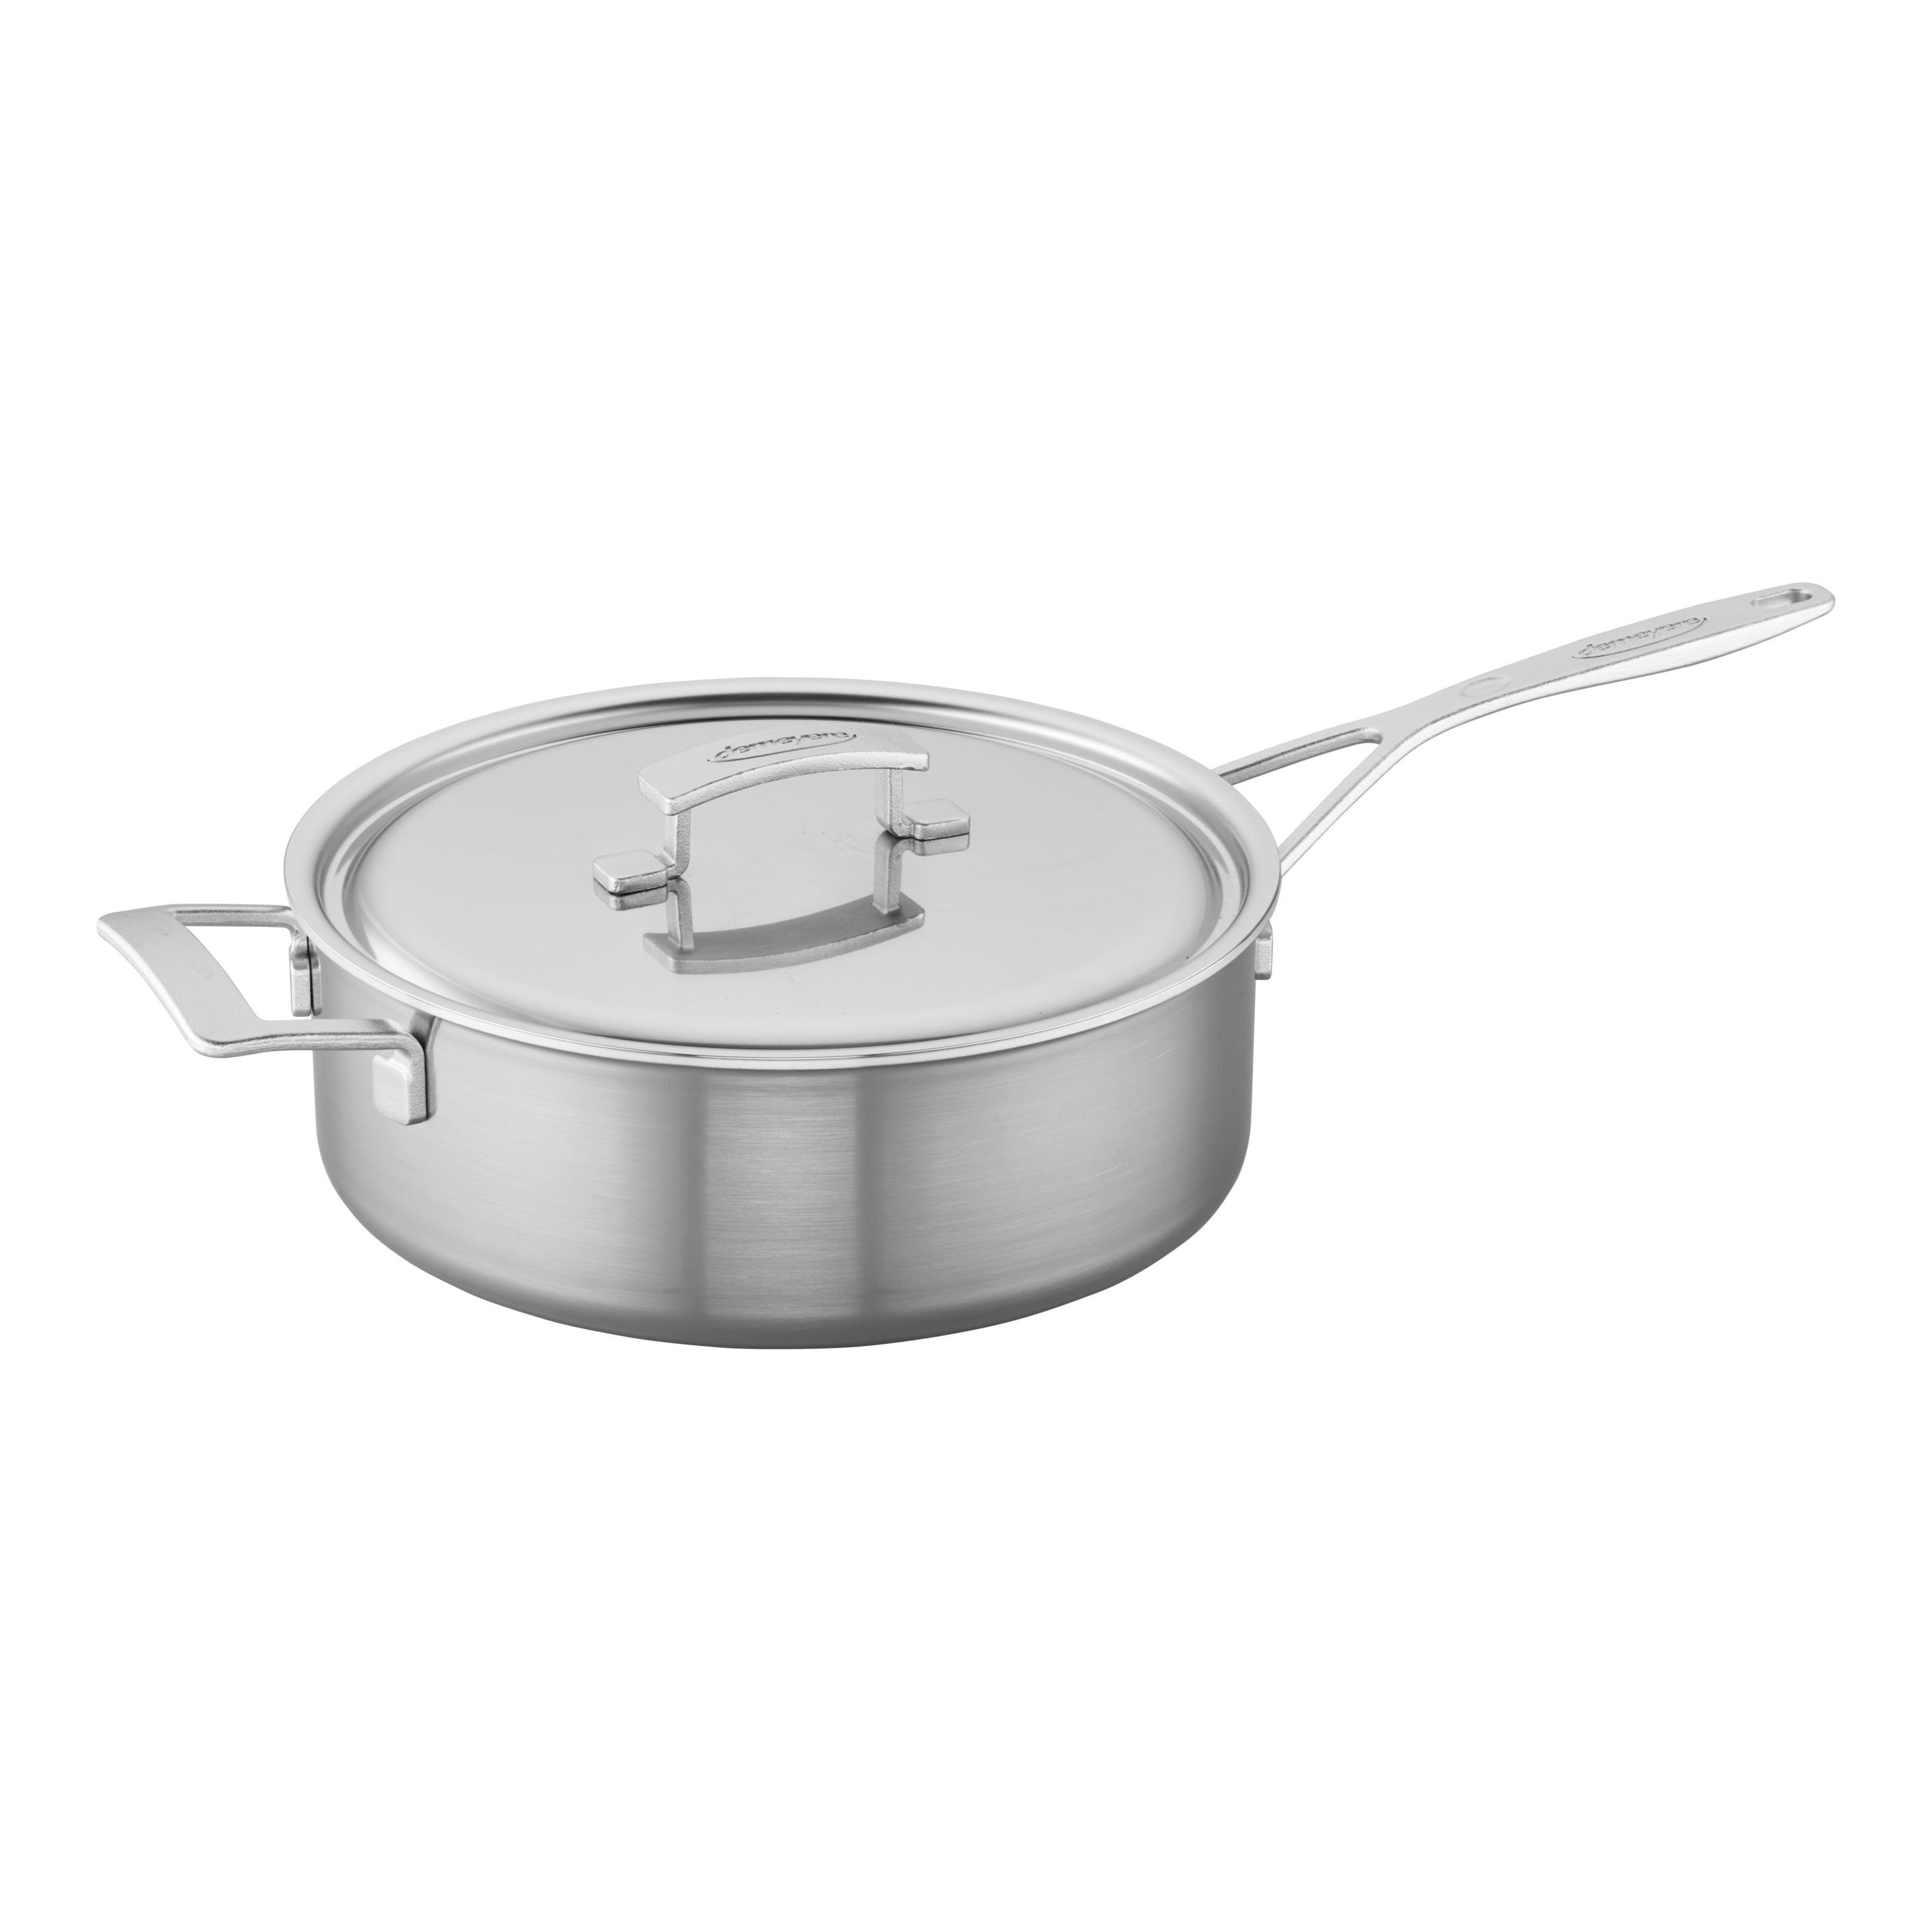 Cooks Stainless Steel 5-qt. Deep Saute Pan, Color: Stainless Steel